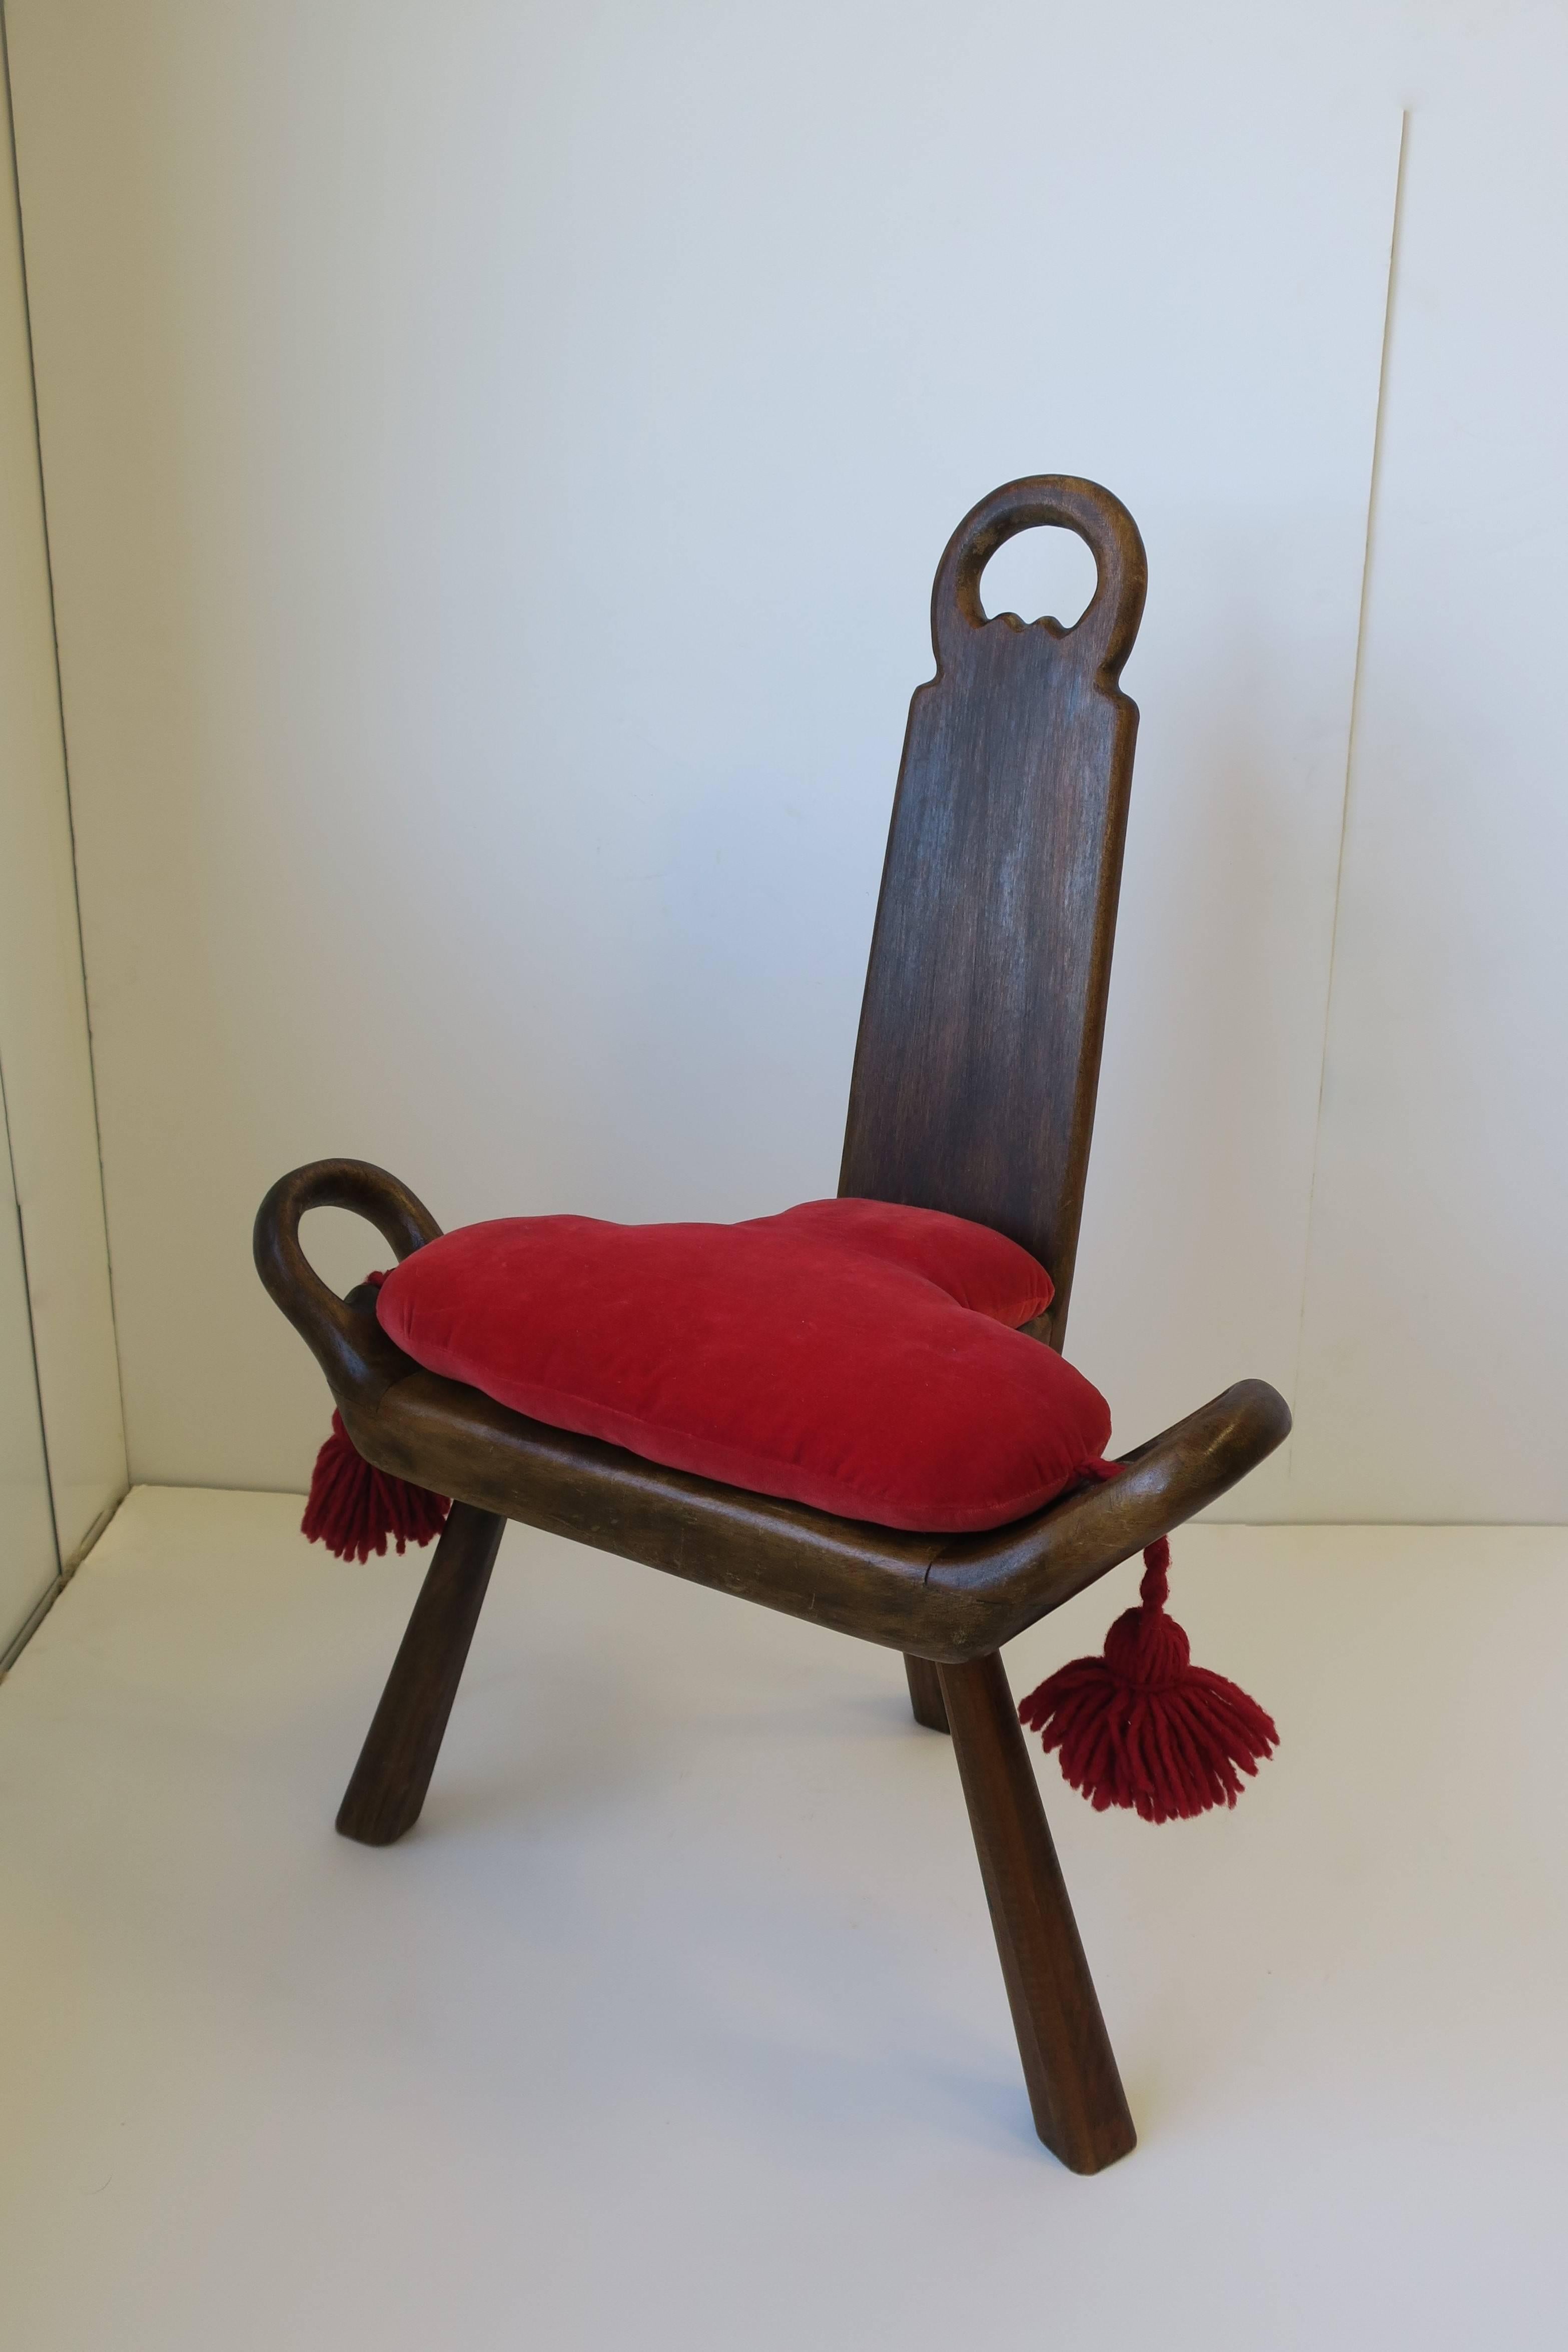 A beautiful vintage Italian Sgabello wood side chair or stool and red velvet seat cushion with tassels. 

Dimensions: 21.5